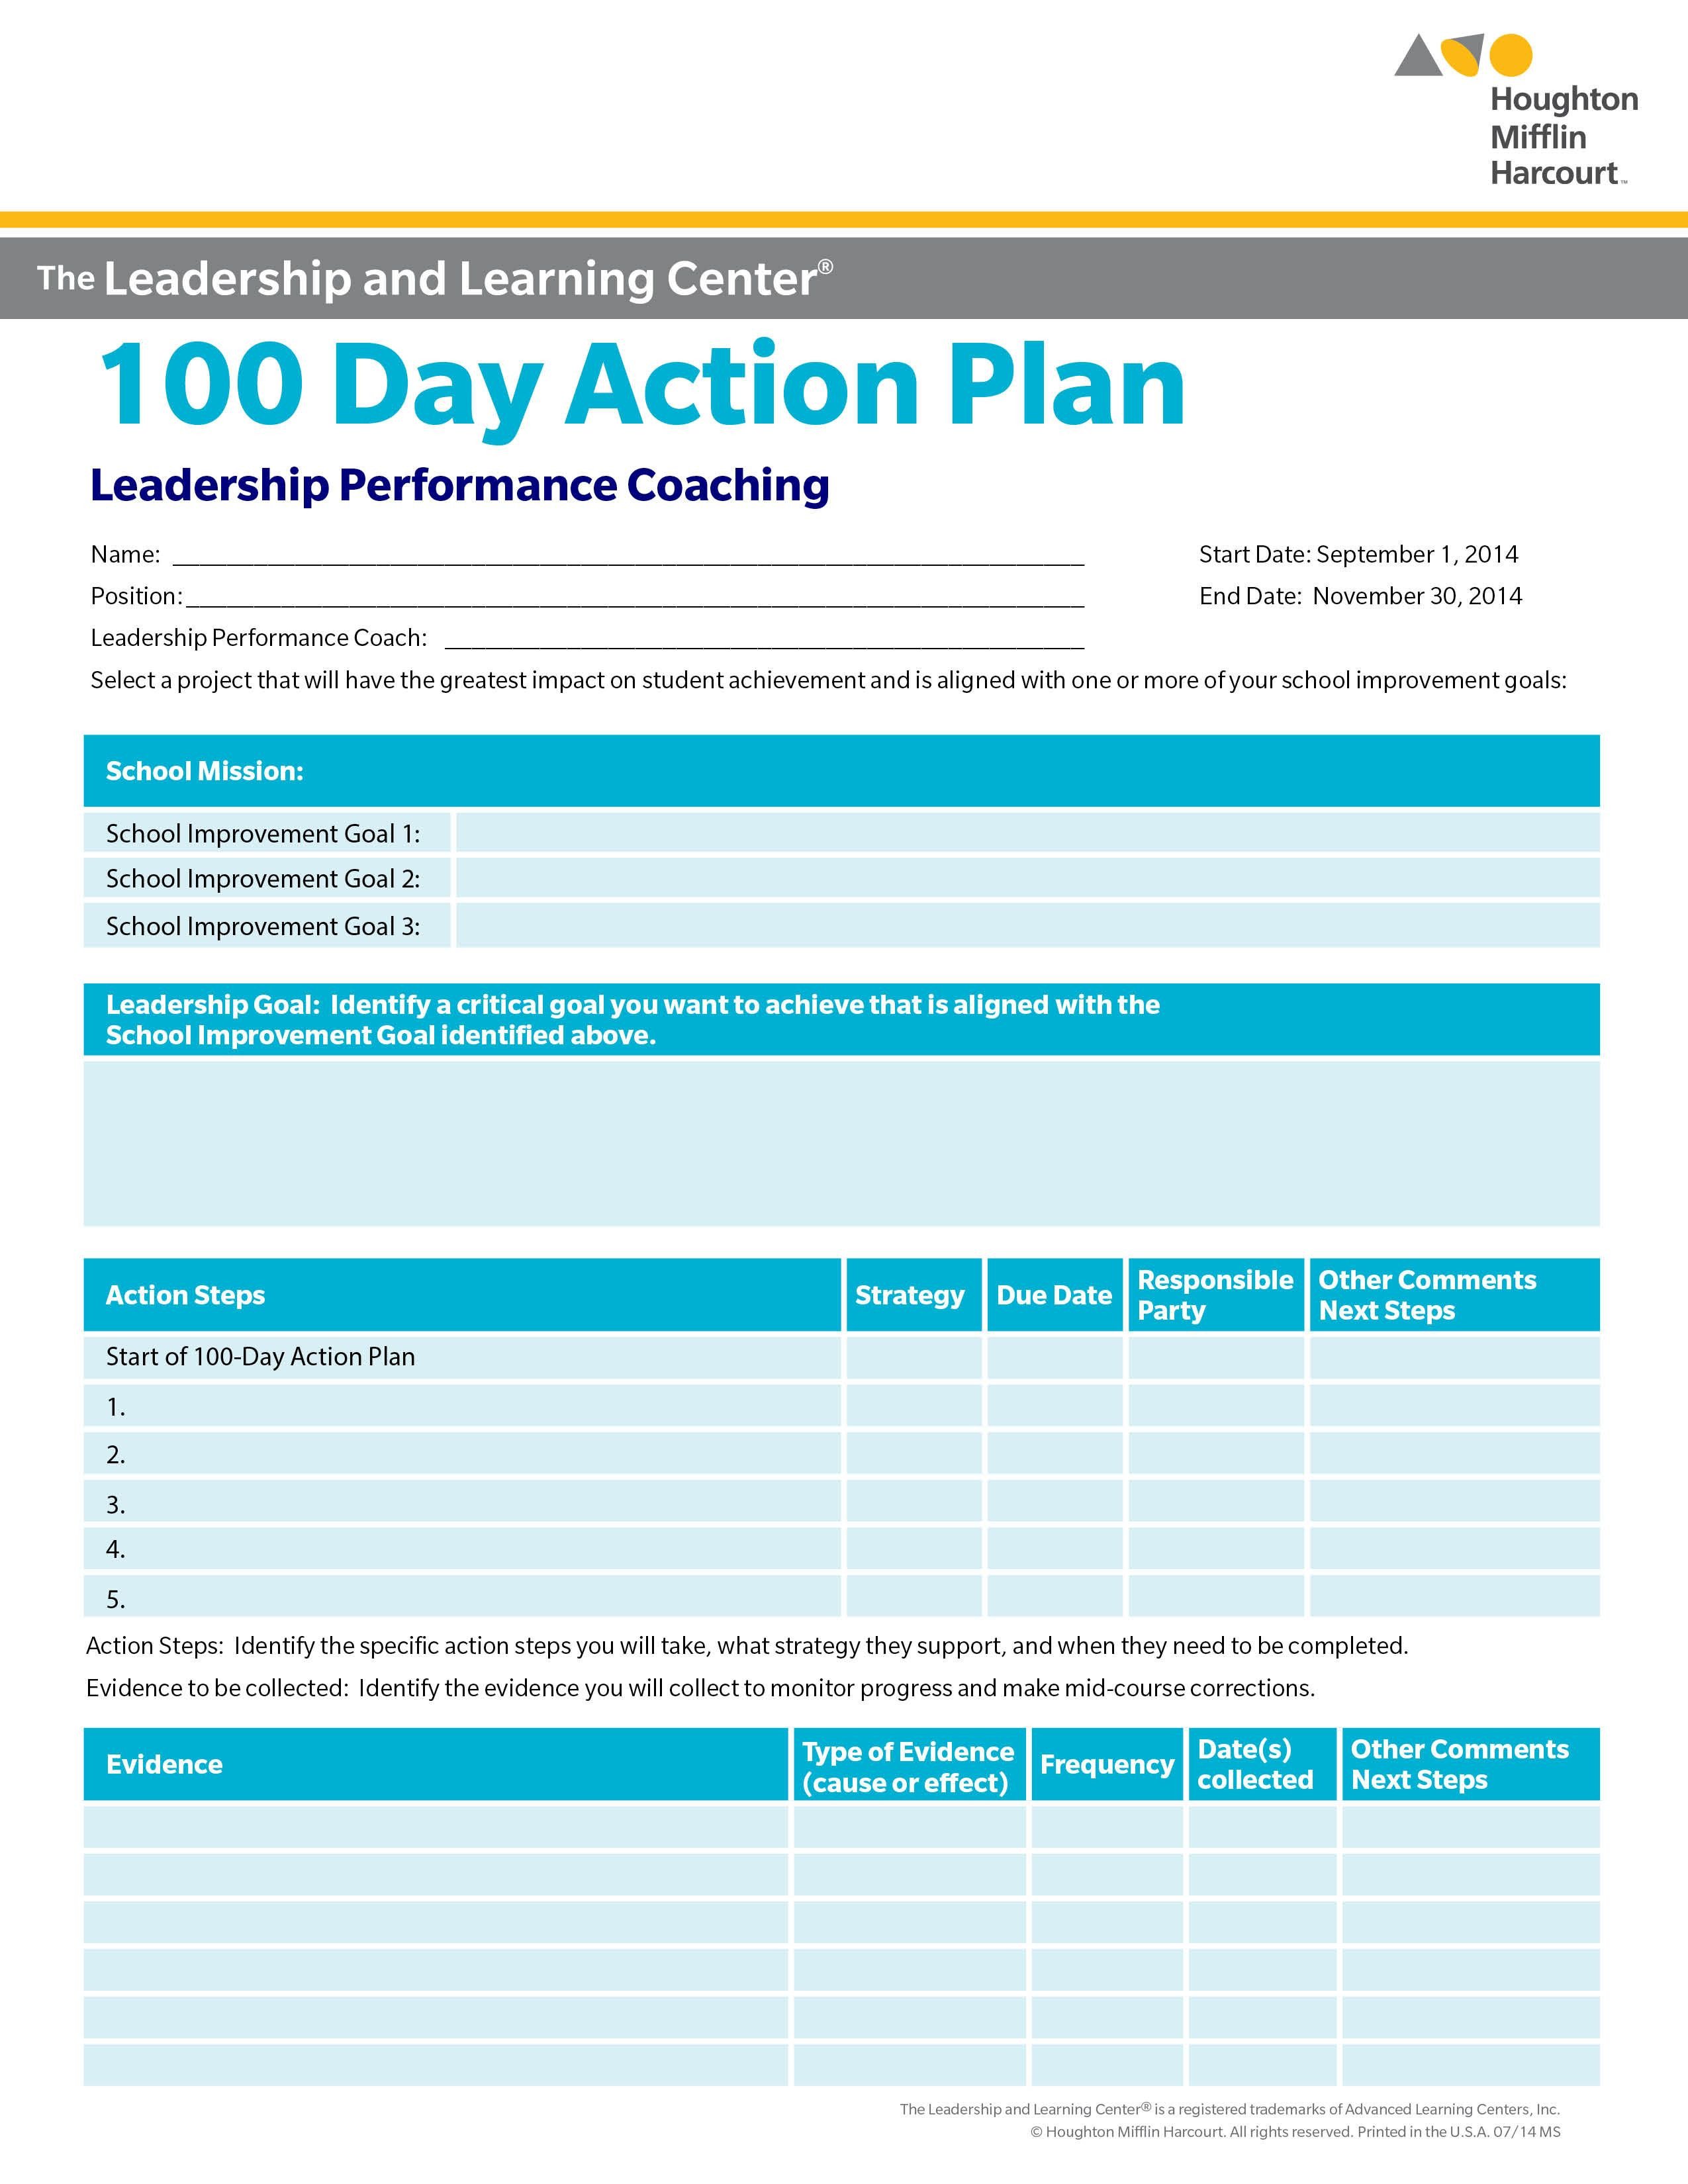 100 Day Plan Template School Improvement 100 Day Action Plan Select A Goal for